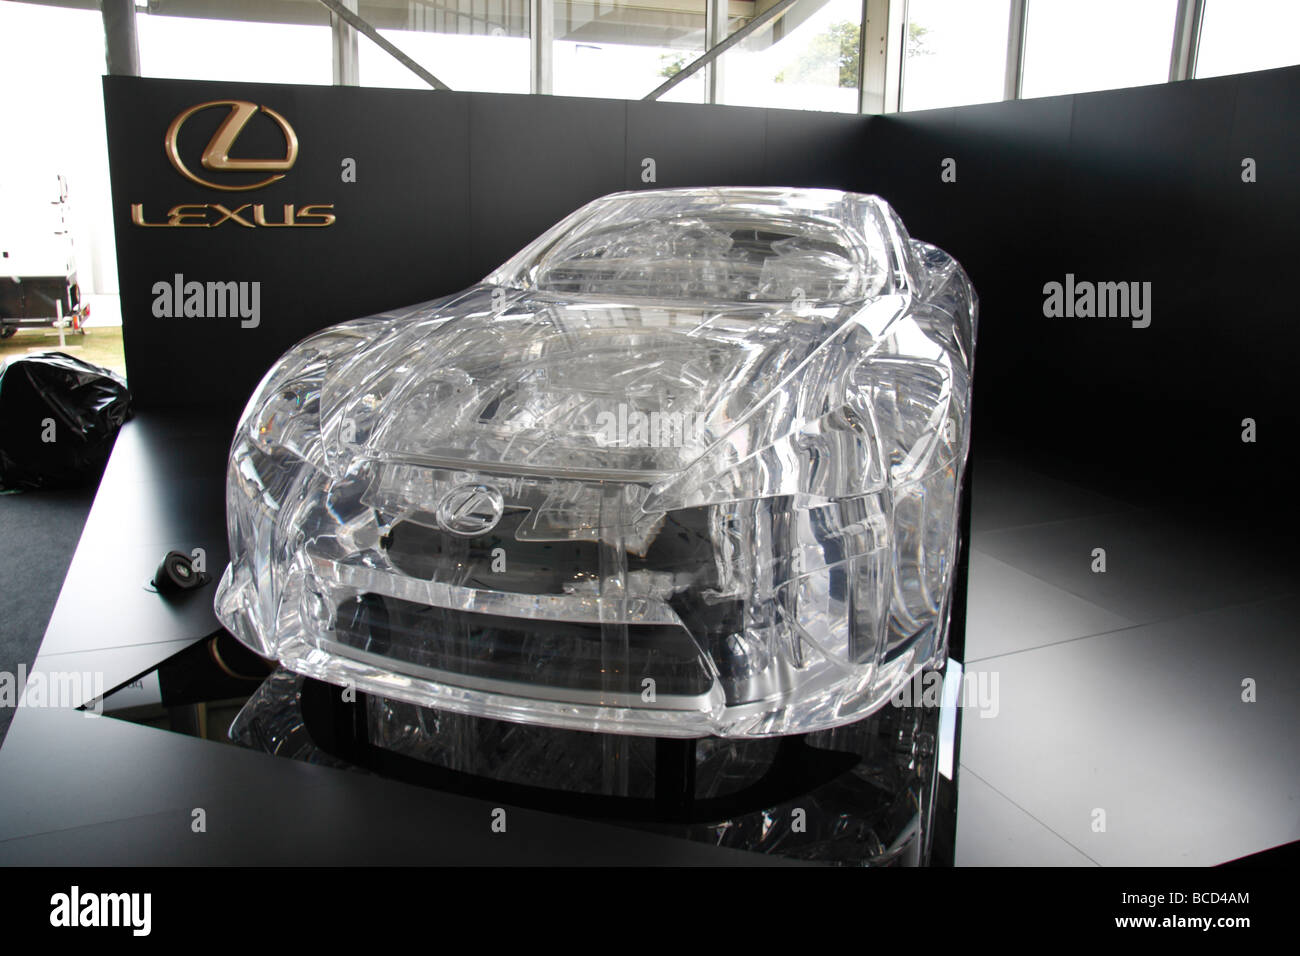 Lexus L-Finesse Crystalised Wind, a ghostly crystal sculpture on display at the Goodwood Festival of Speed, July 2009. Stock Photo